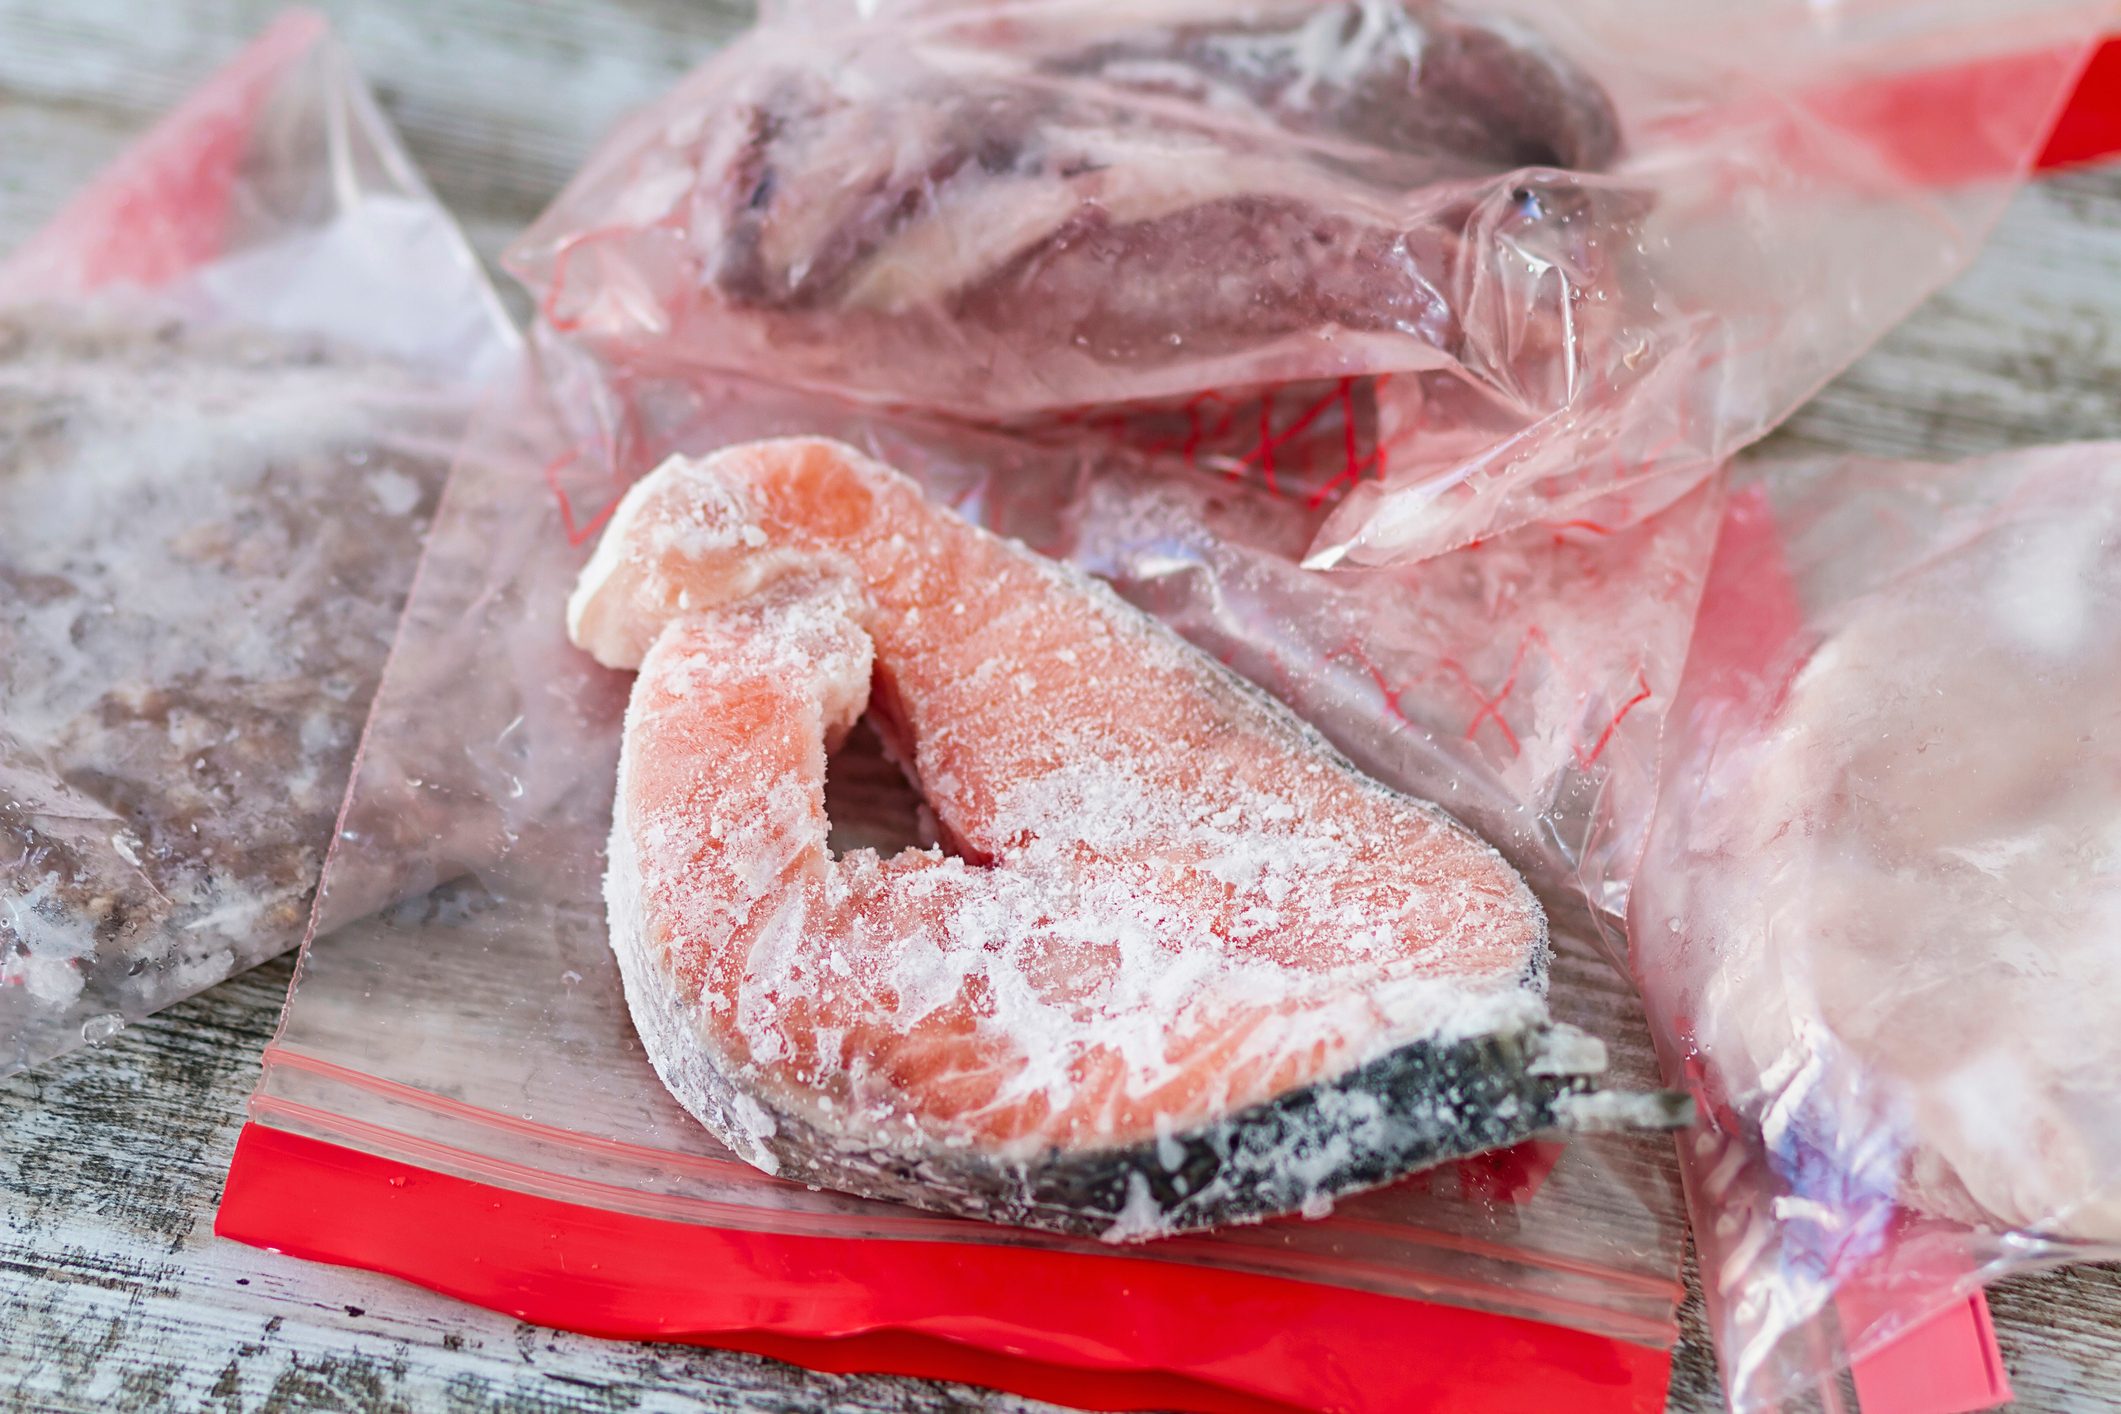 Freezing Food and Frozen Food Safety